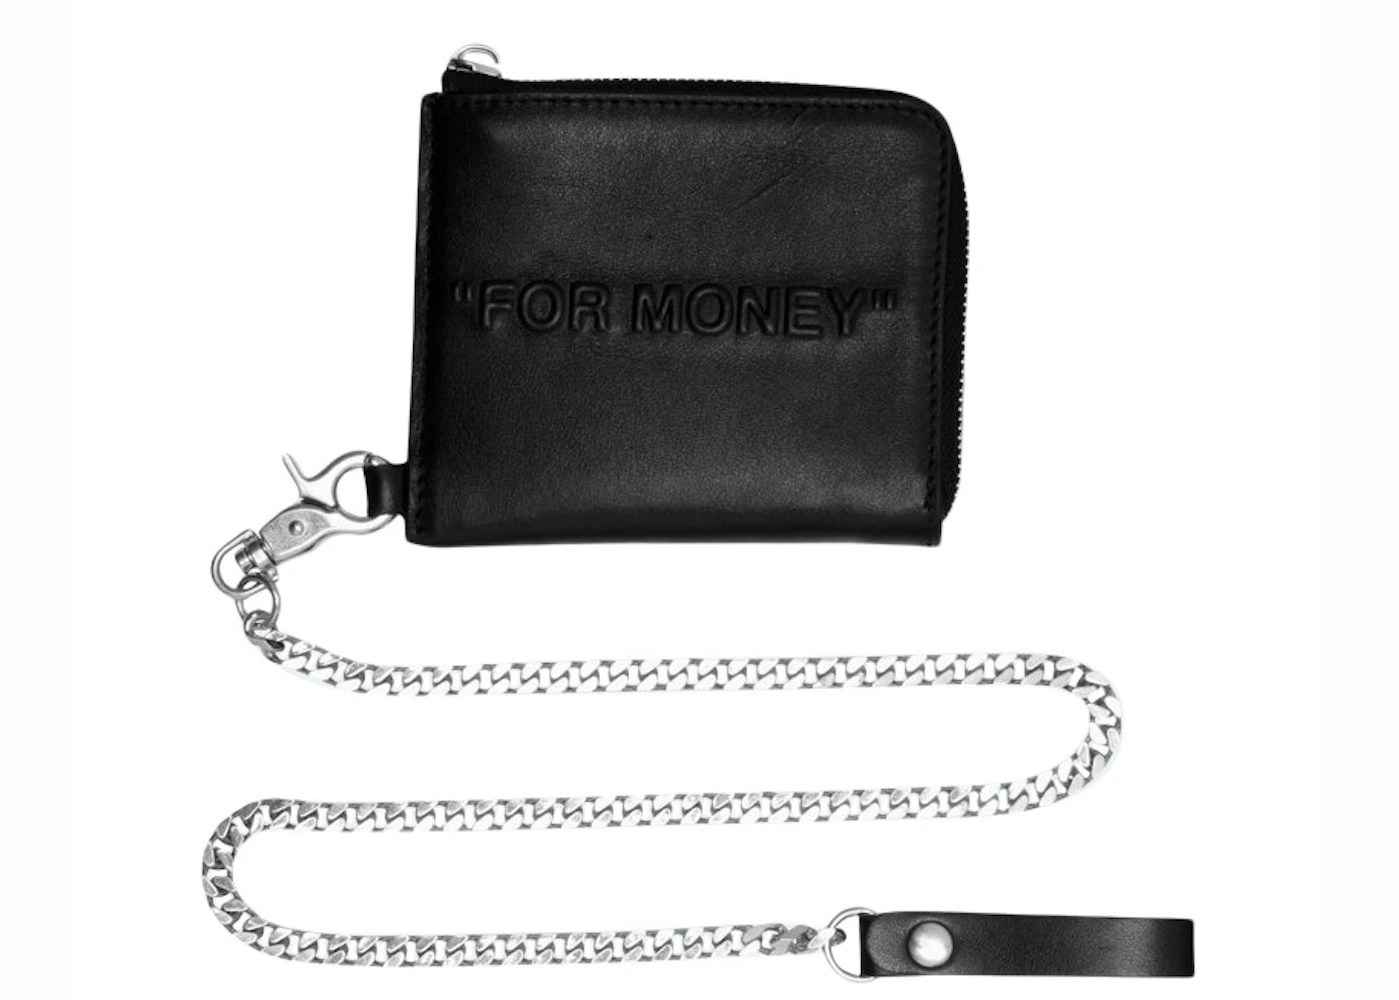 Off-White c/o Virgil Abloh 2022 Jitney Quote Wallet On Chain